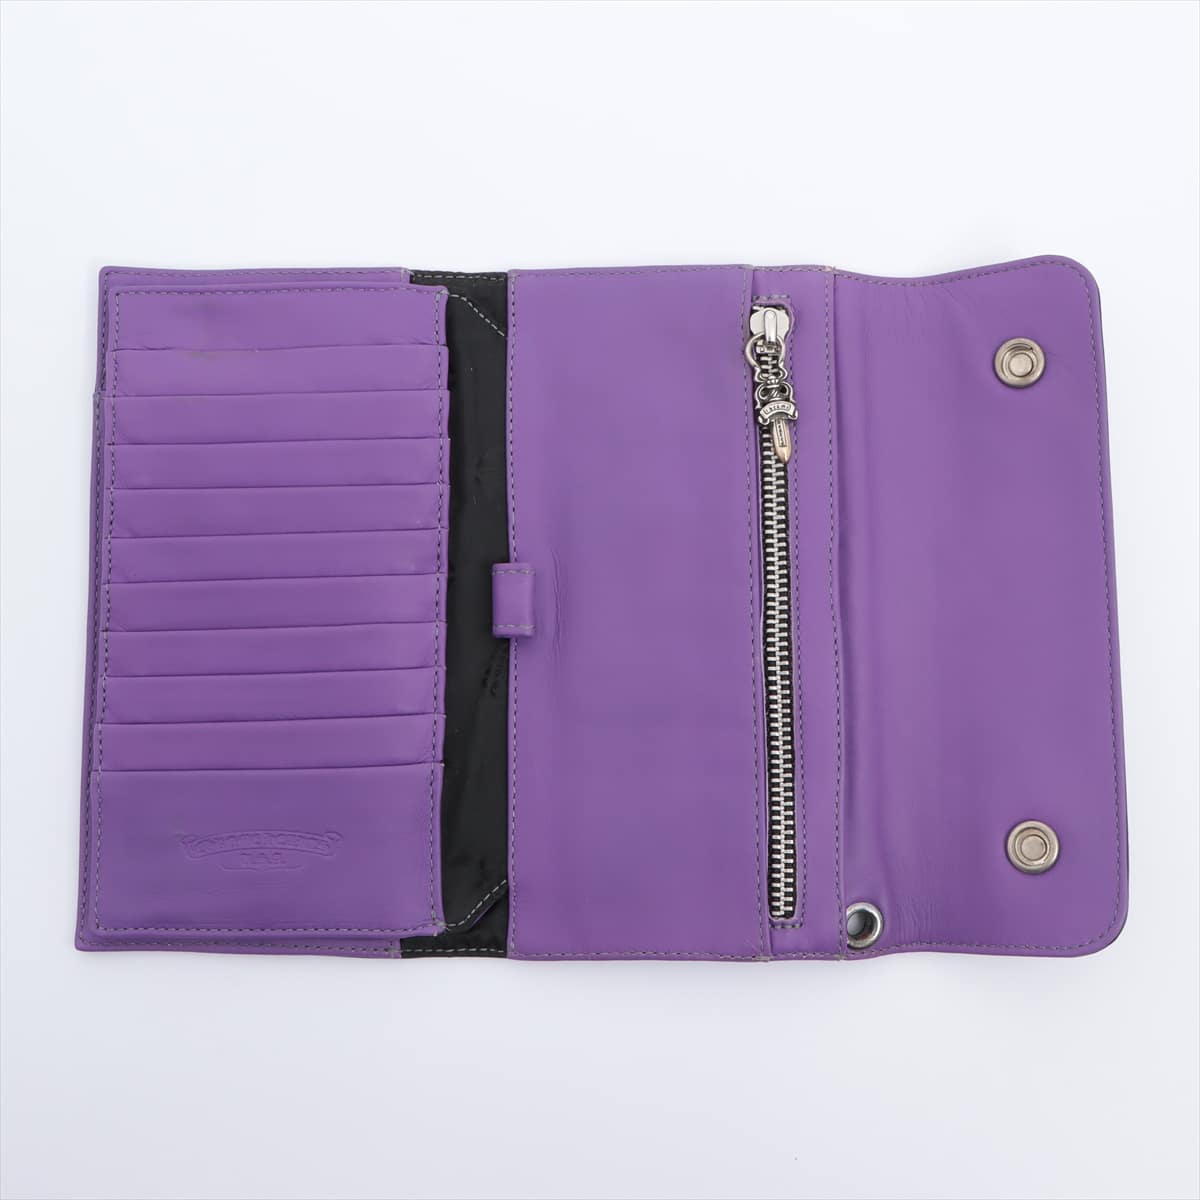 Chrome Hearts Wave Wallet Wallet Leather Navy x purple